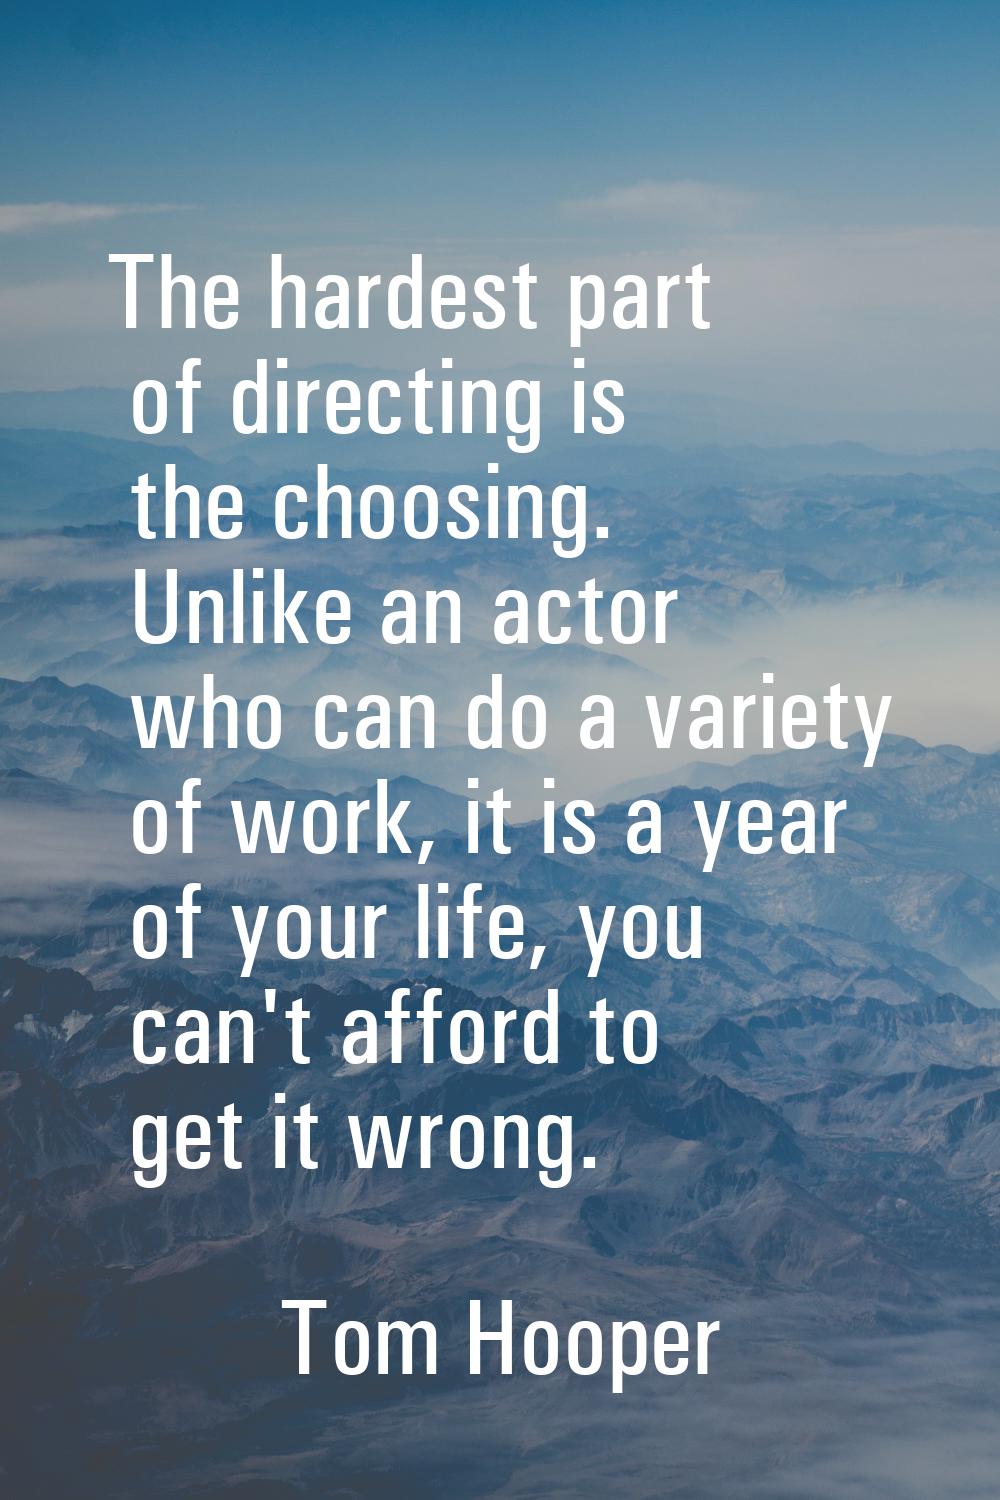 The hardest part of directing is the choosing. Unlike an actor who can do a variety of work, it is 